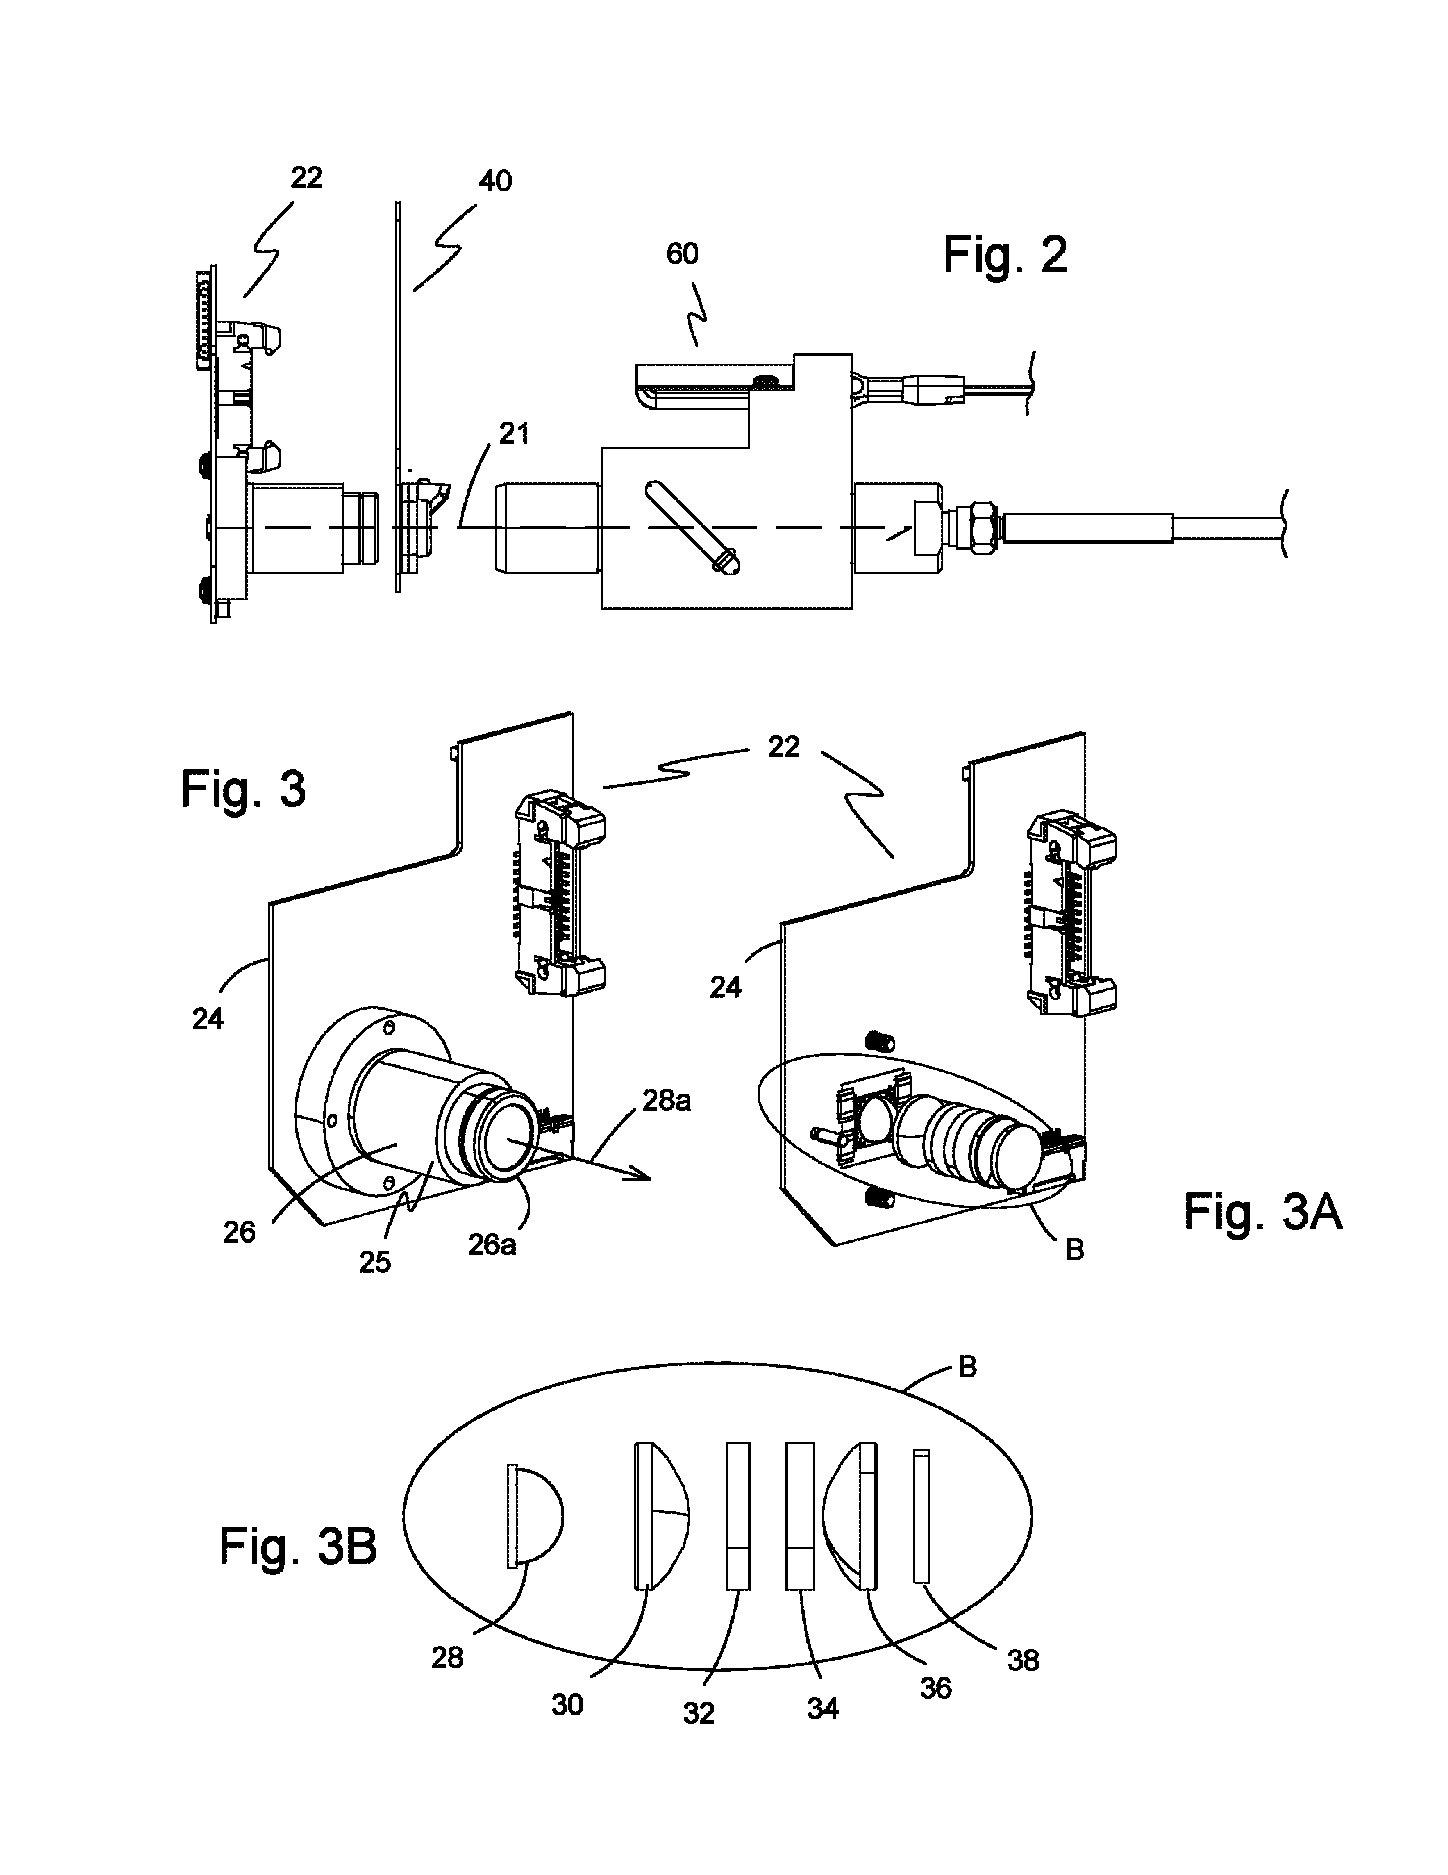 Analyte system and method for determining hemoglobin parameters in whole blood